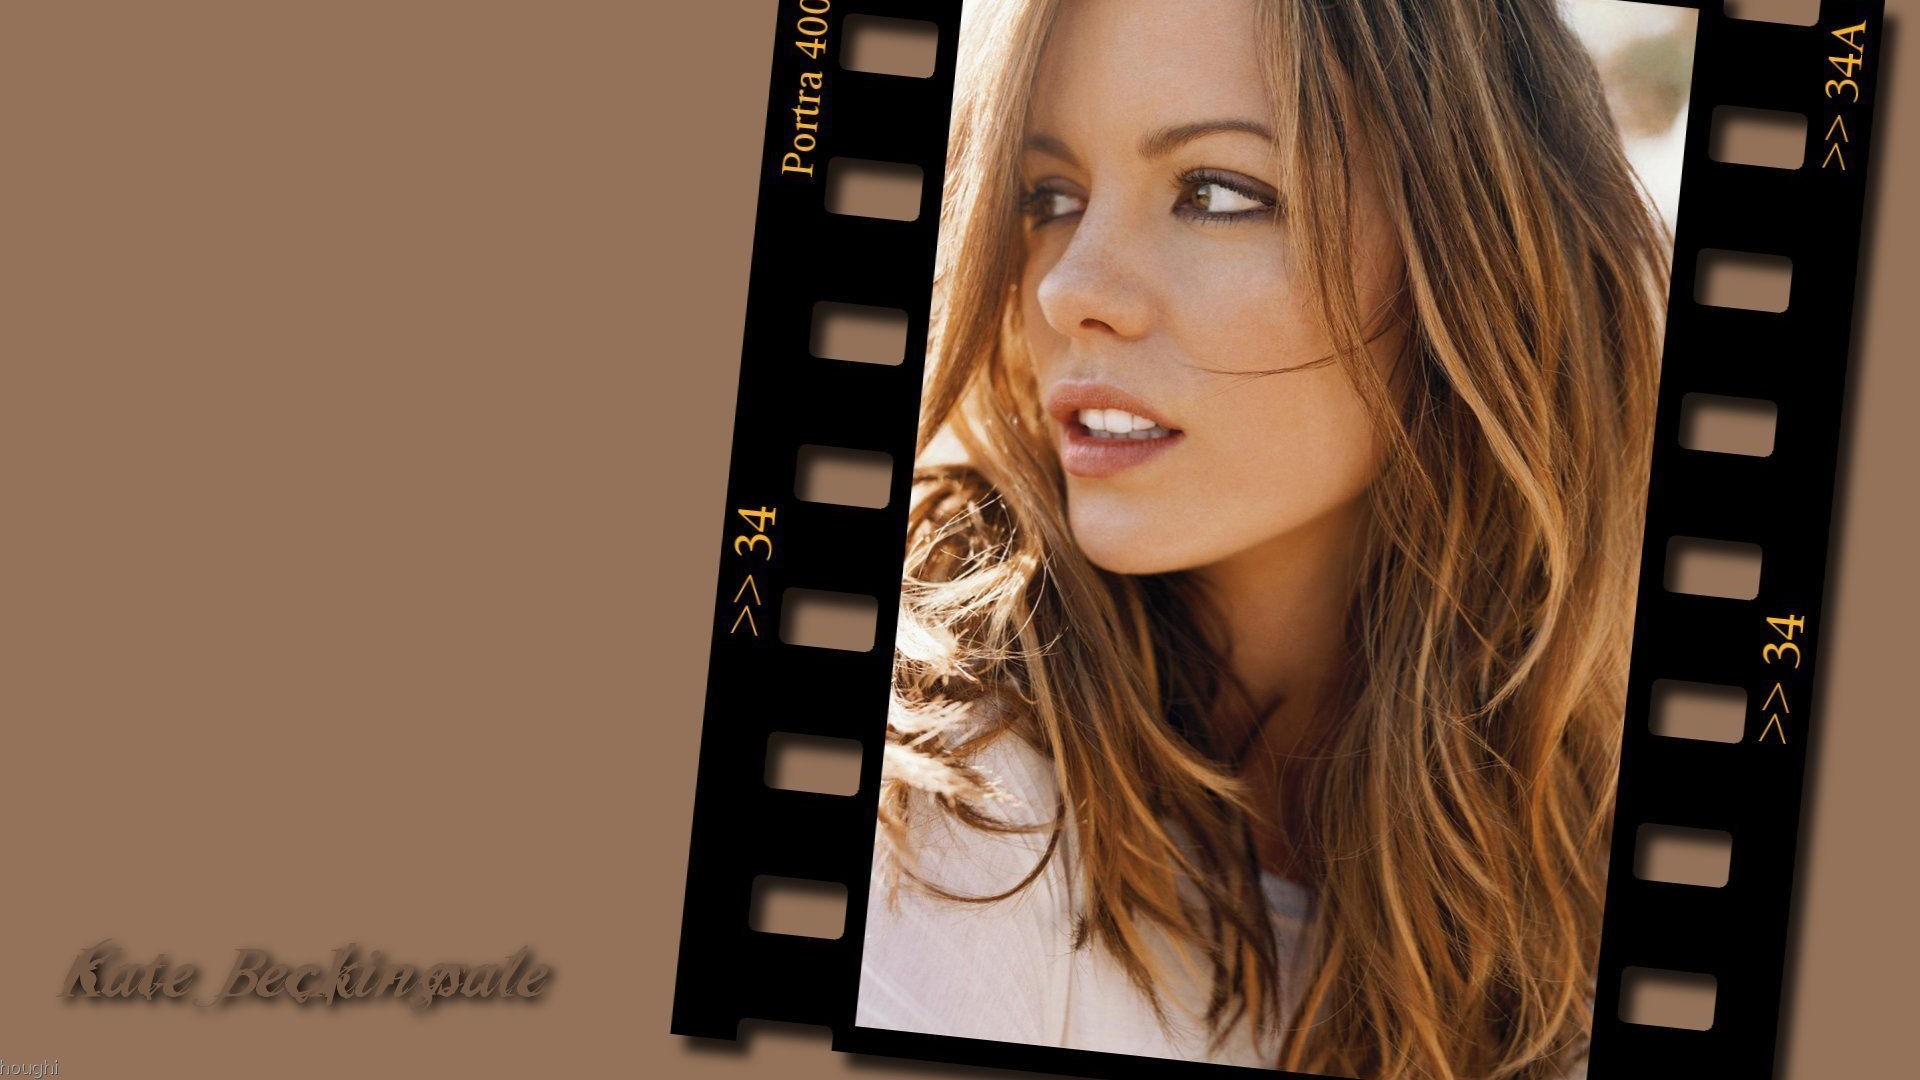 Kate Beckinsale #067 - 1920x1080 Wallpapers Pictures Photos Images